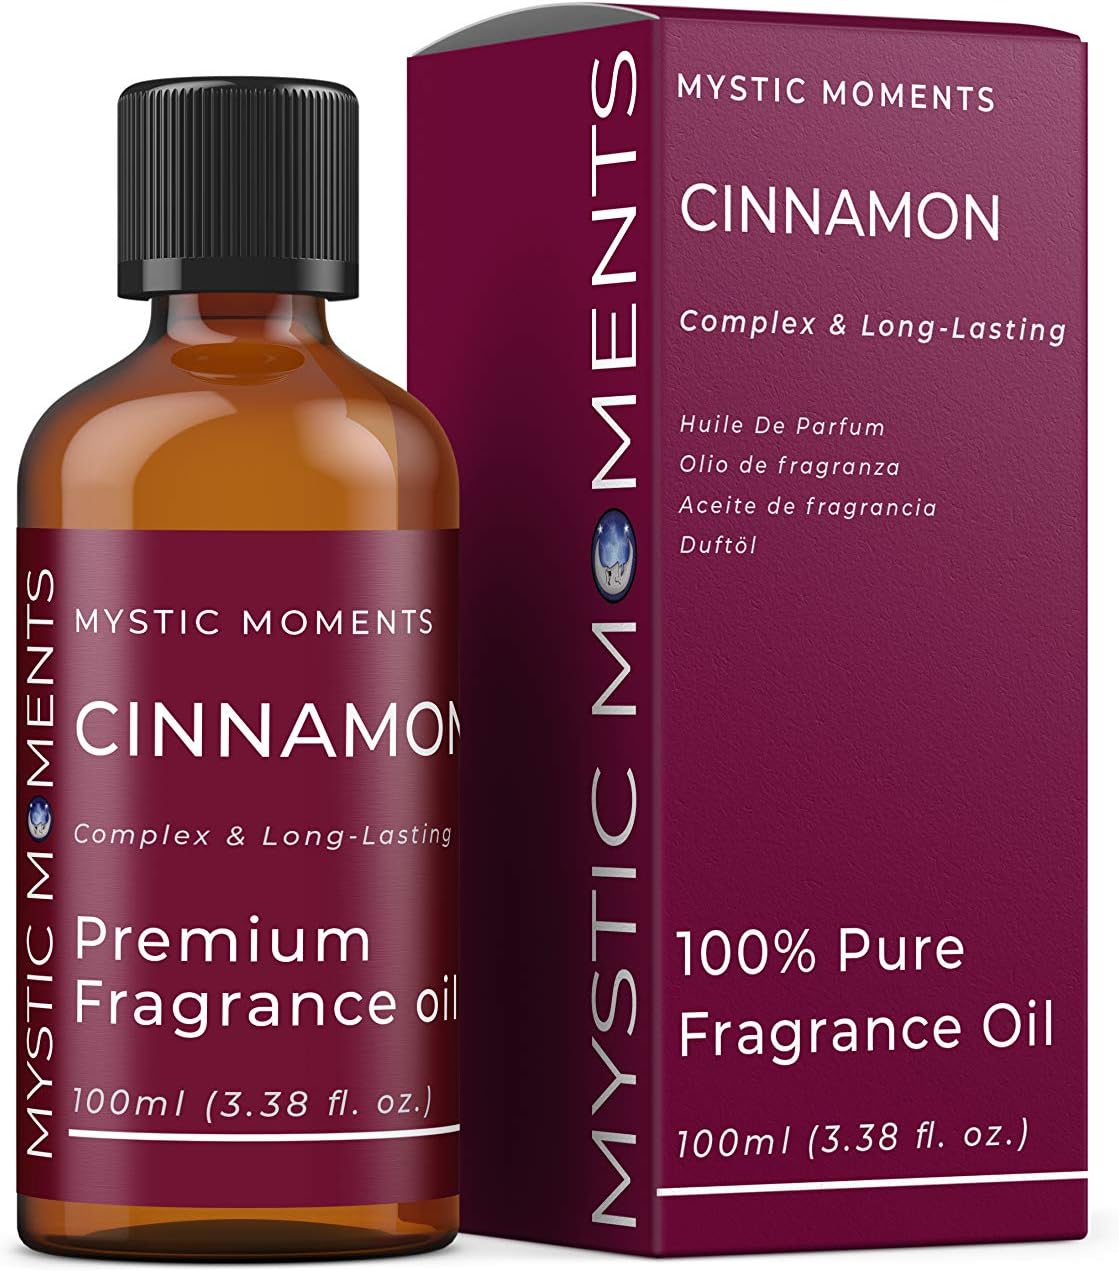 Mystic Moments | Cinnamon Fragrance Oil - 100ml - Perfect for Soaps, Candles, Bath Bombs, Oil Burners, Diffusers and Skin & Hair Care Items